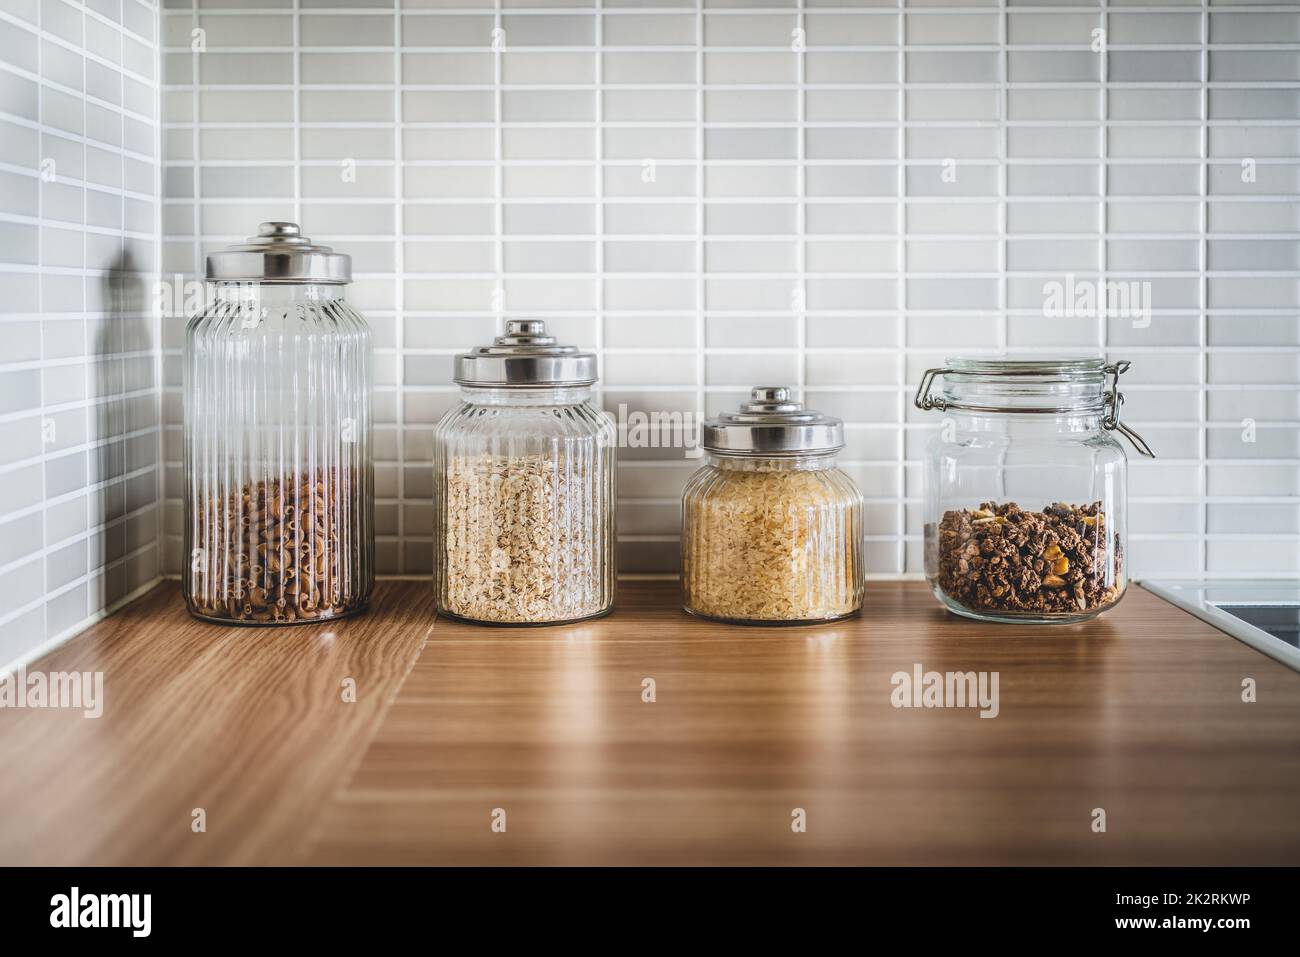 Kitchen containers and food in glass jars. Ingredient organization and sustainable storage. Pasta, oatmeal, rice and muesli. Close up of wood table. Stock Photo